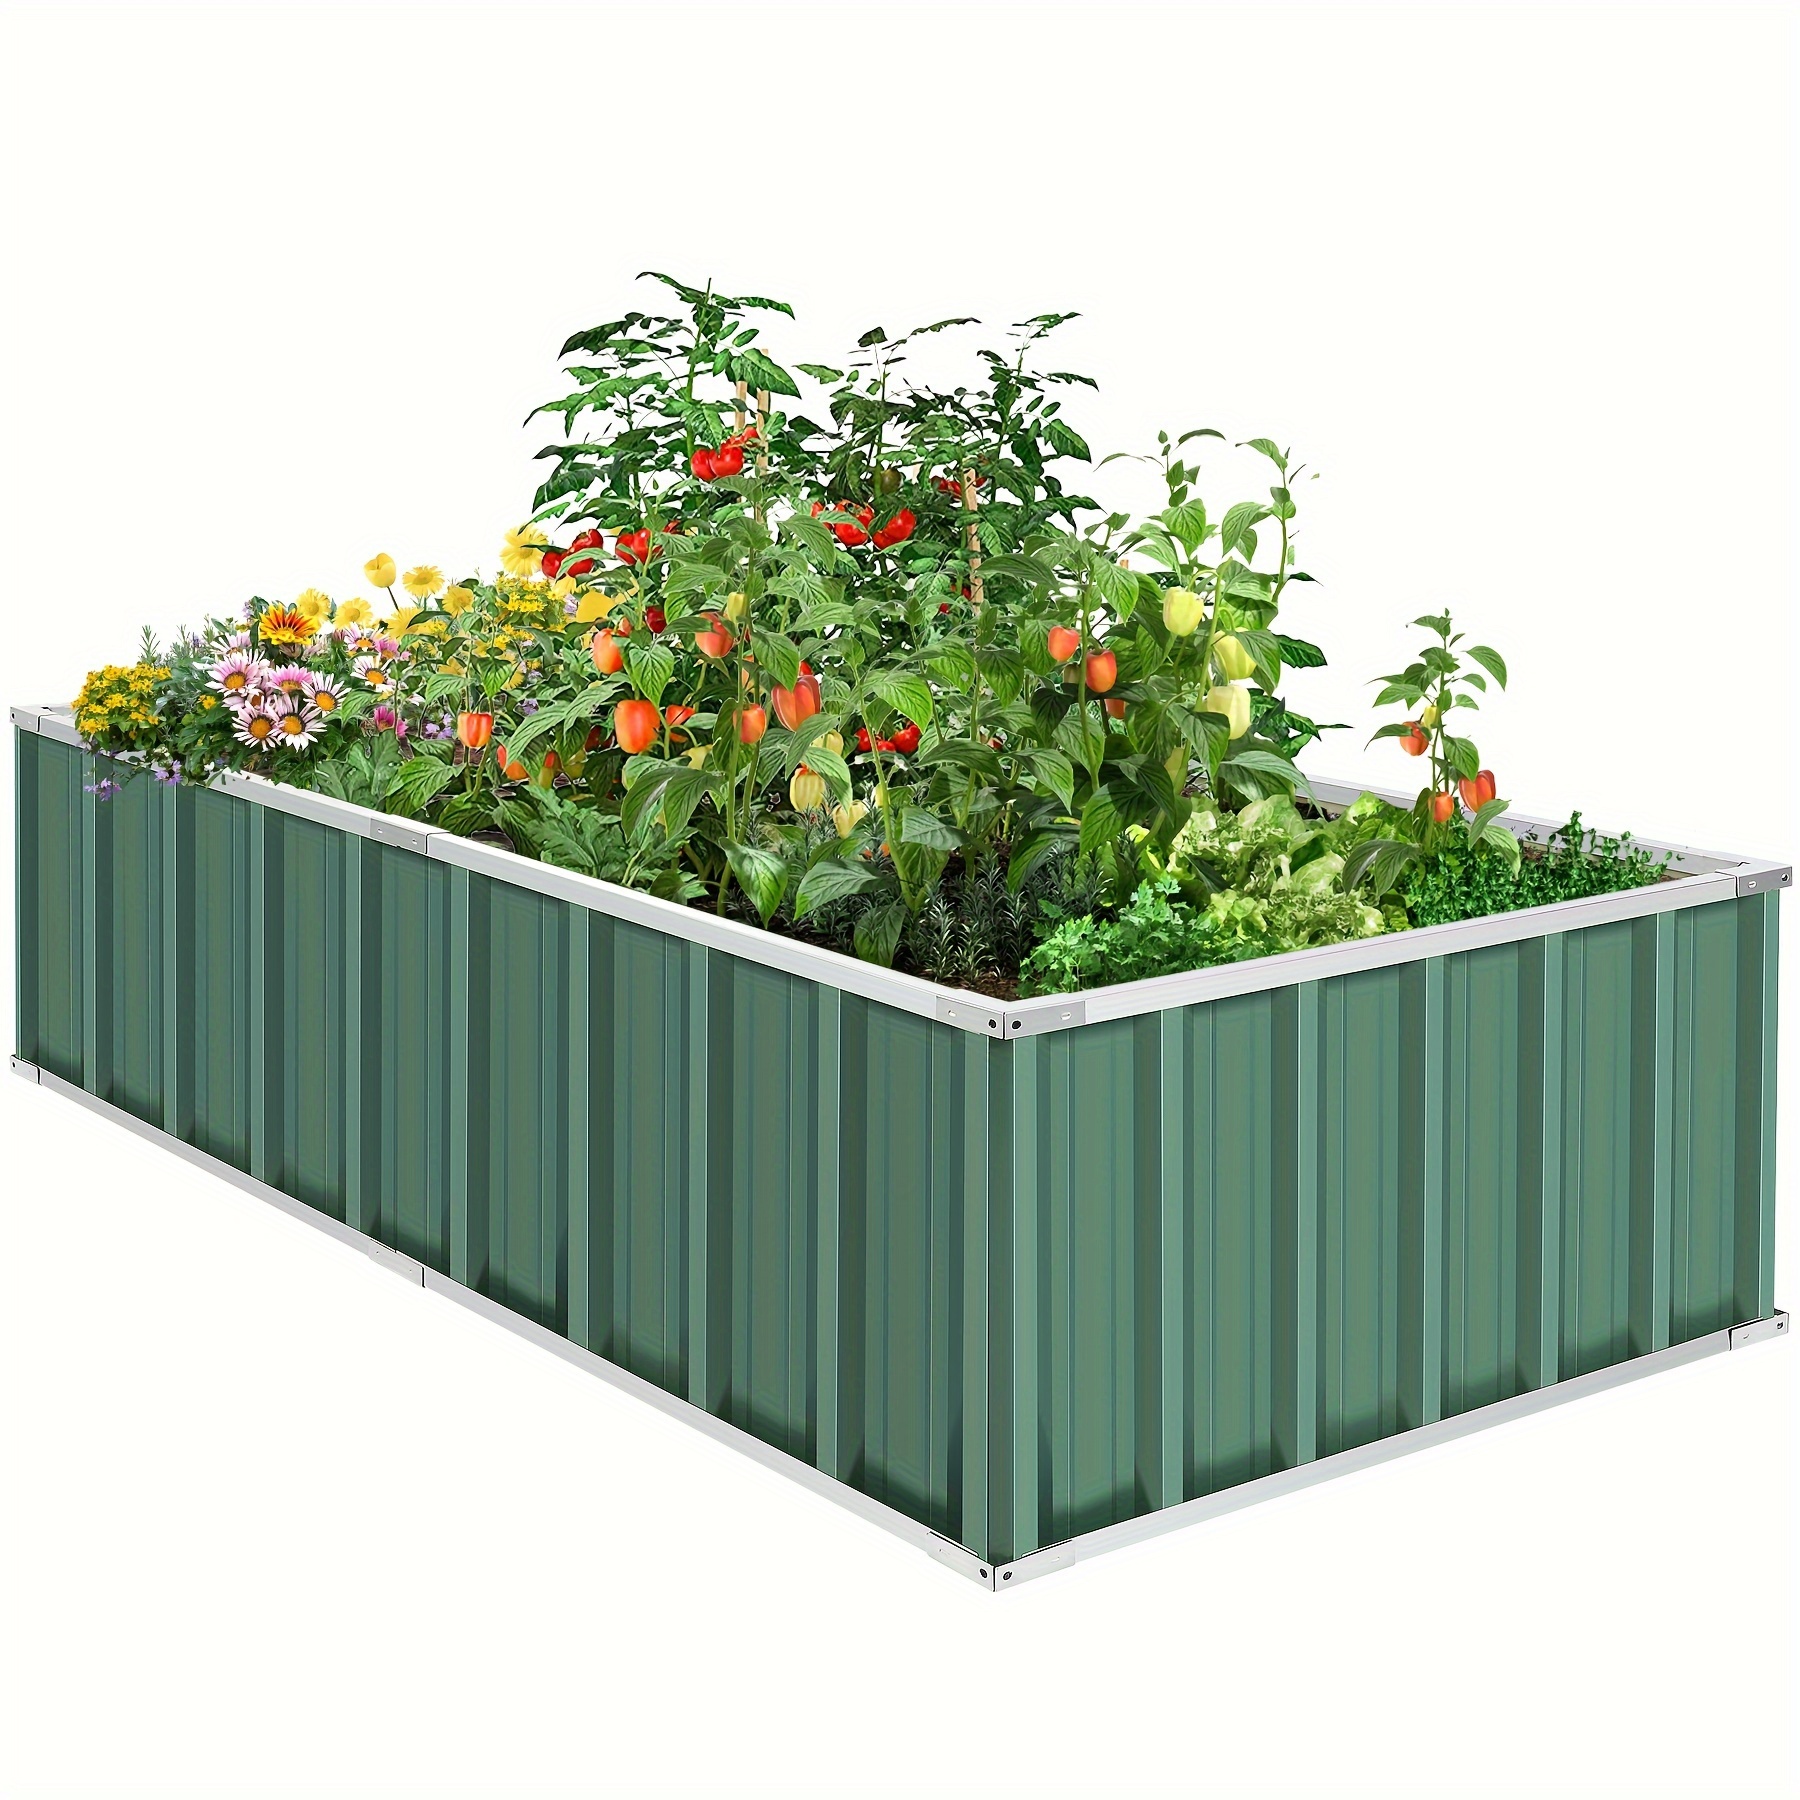 

Raised Garden Bed, 5.6ftx3ftx1.5ft Large Metal Garden Bed, Galvanized Steel Planter Box, Suitable For Vegetables, Flowers, Herbs